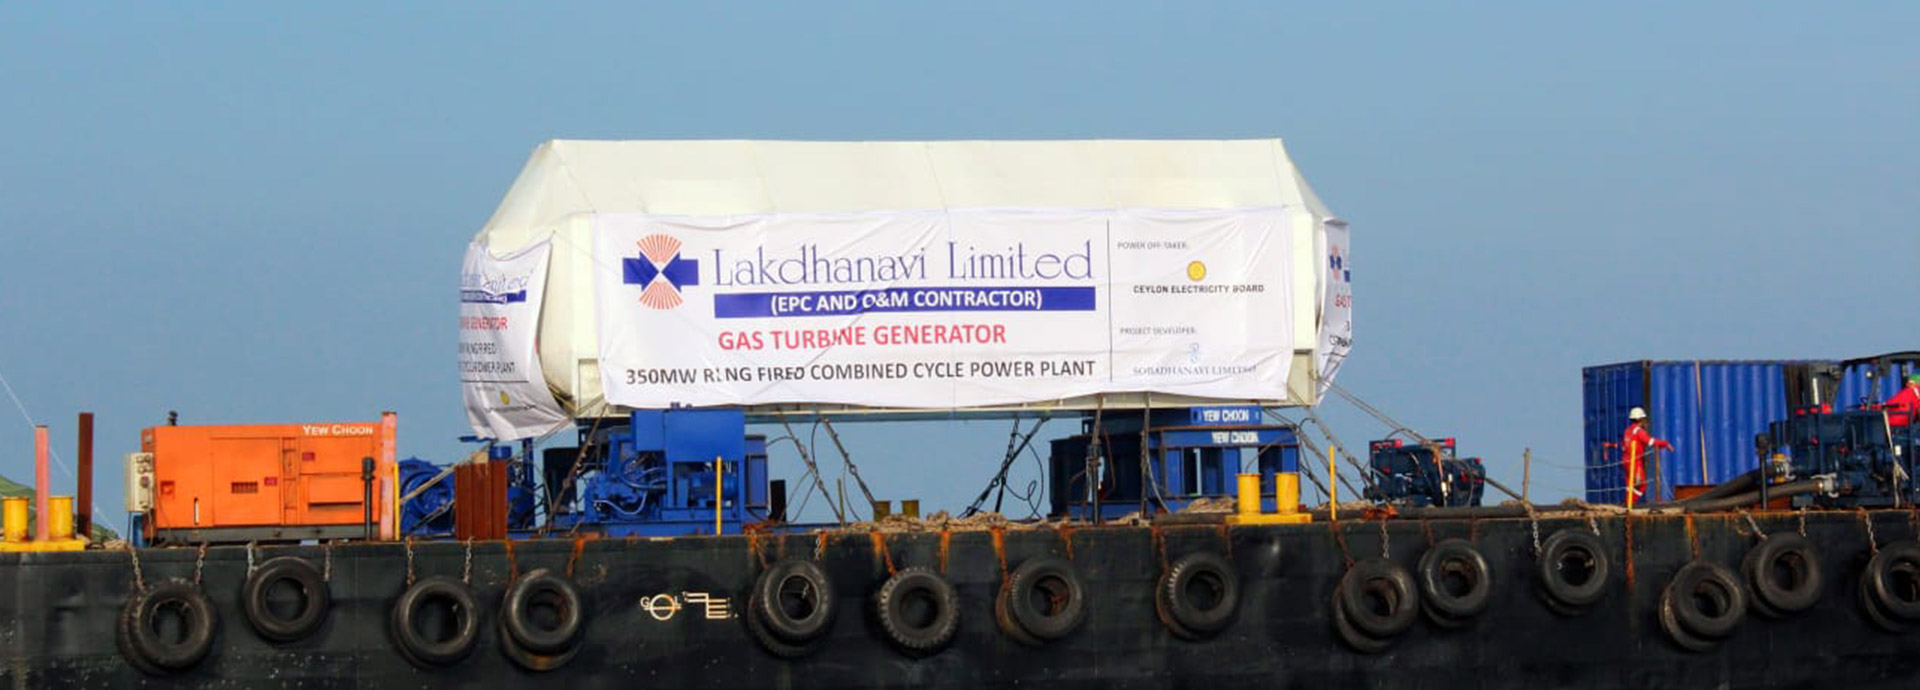 LTL Sobadhanavi embarks on the First Phase of Heavy Equipment Transport